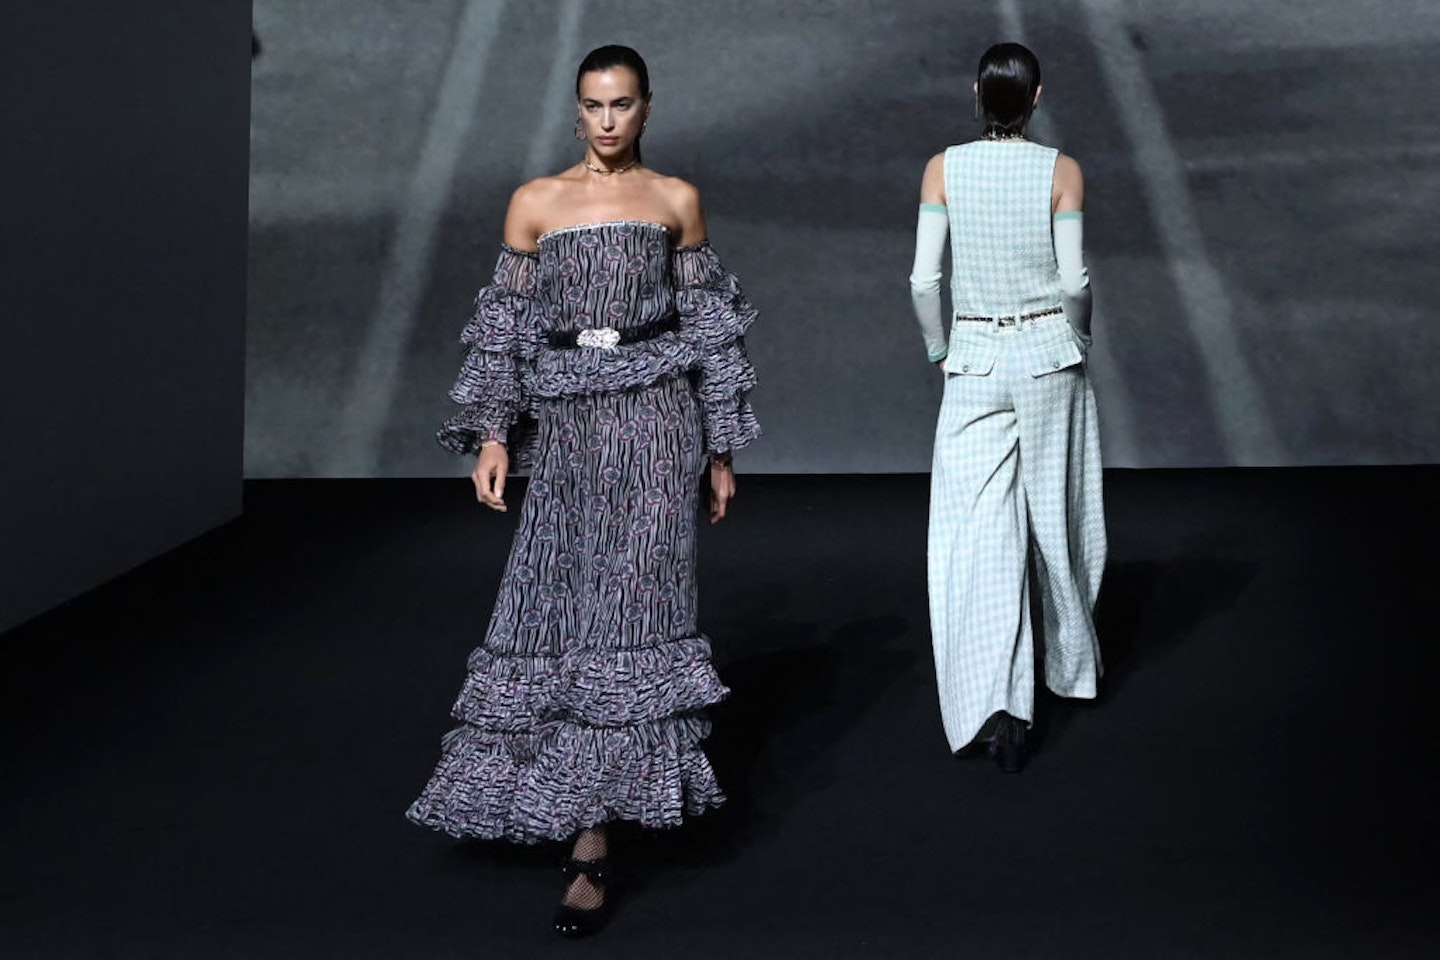 These 3 fashion trends spotted at the Chanel show will make waves